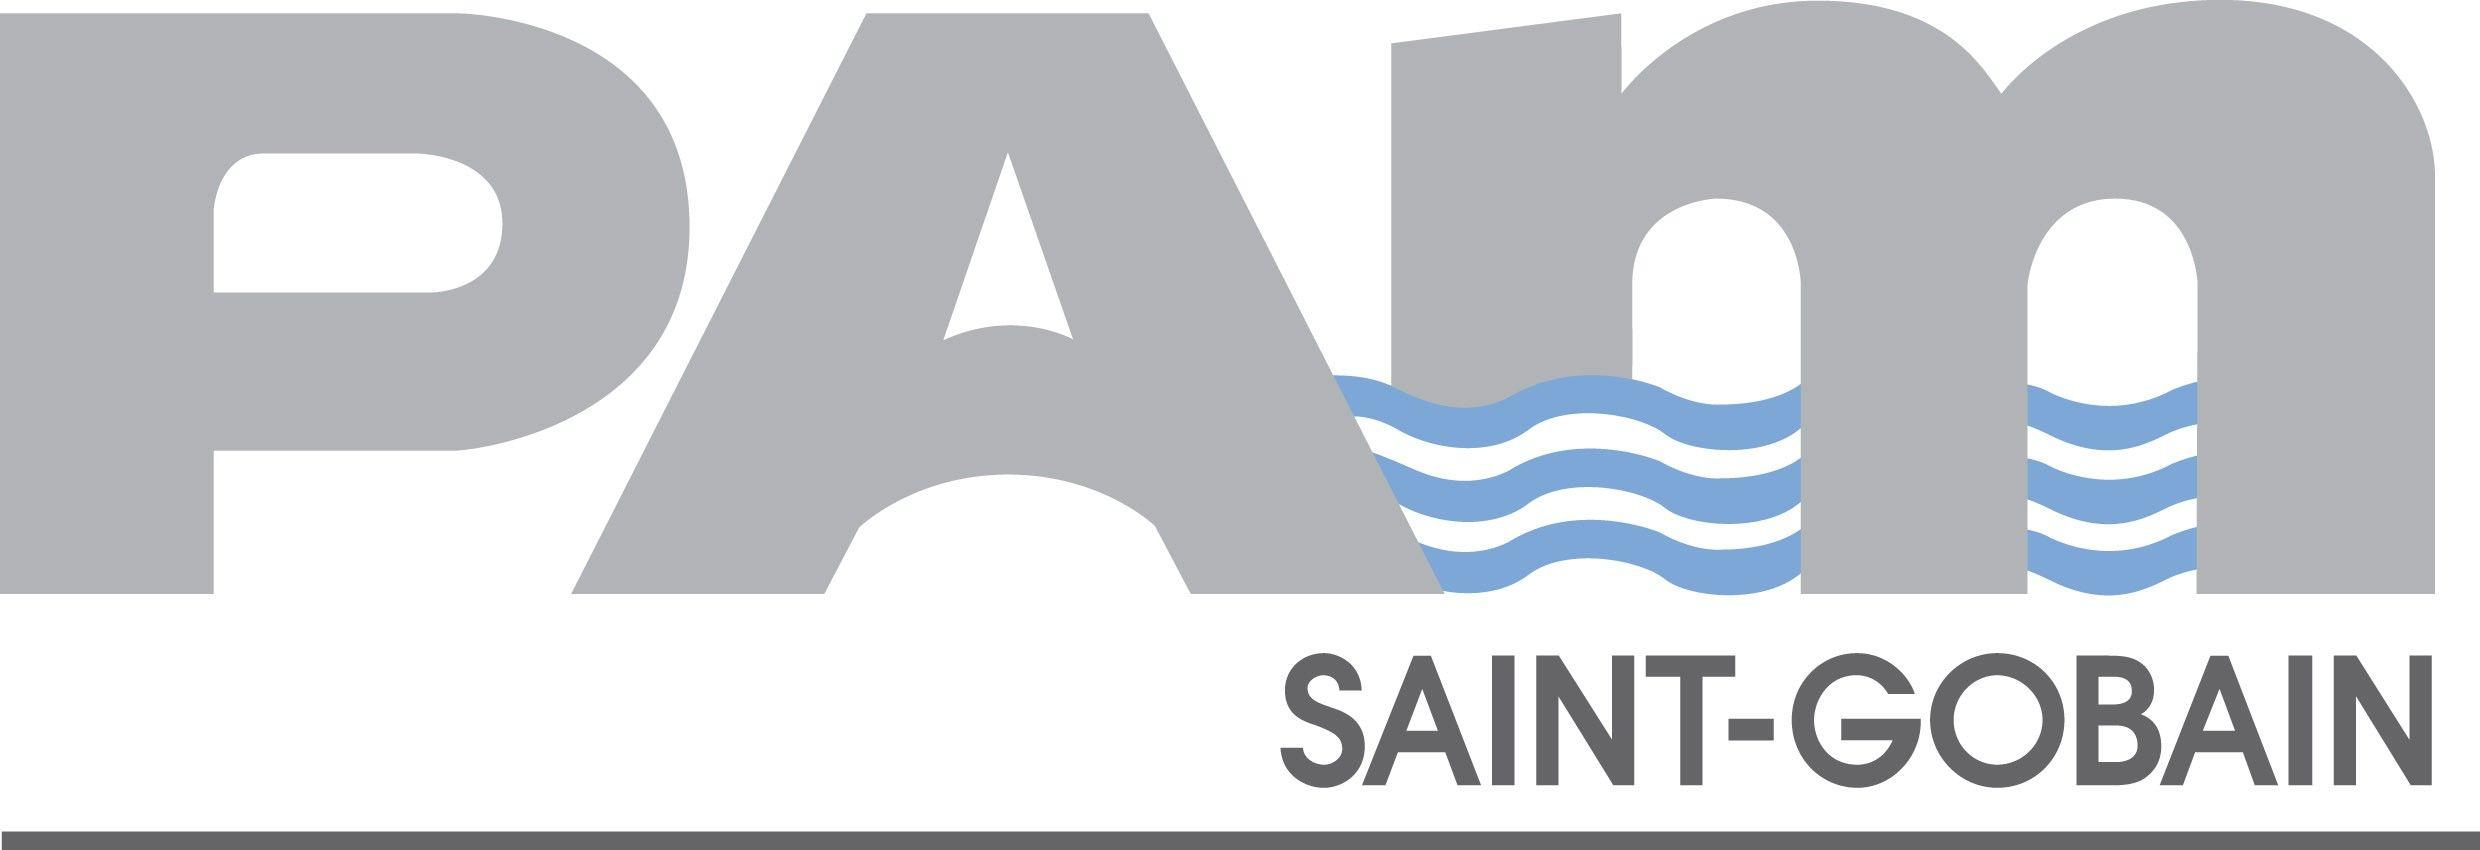 Saint-Gobain Logo - Saint Gobain PAM: Search Our Water Supply Pipes & More On SpecifiedBy